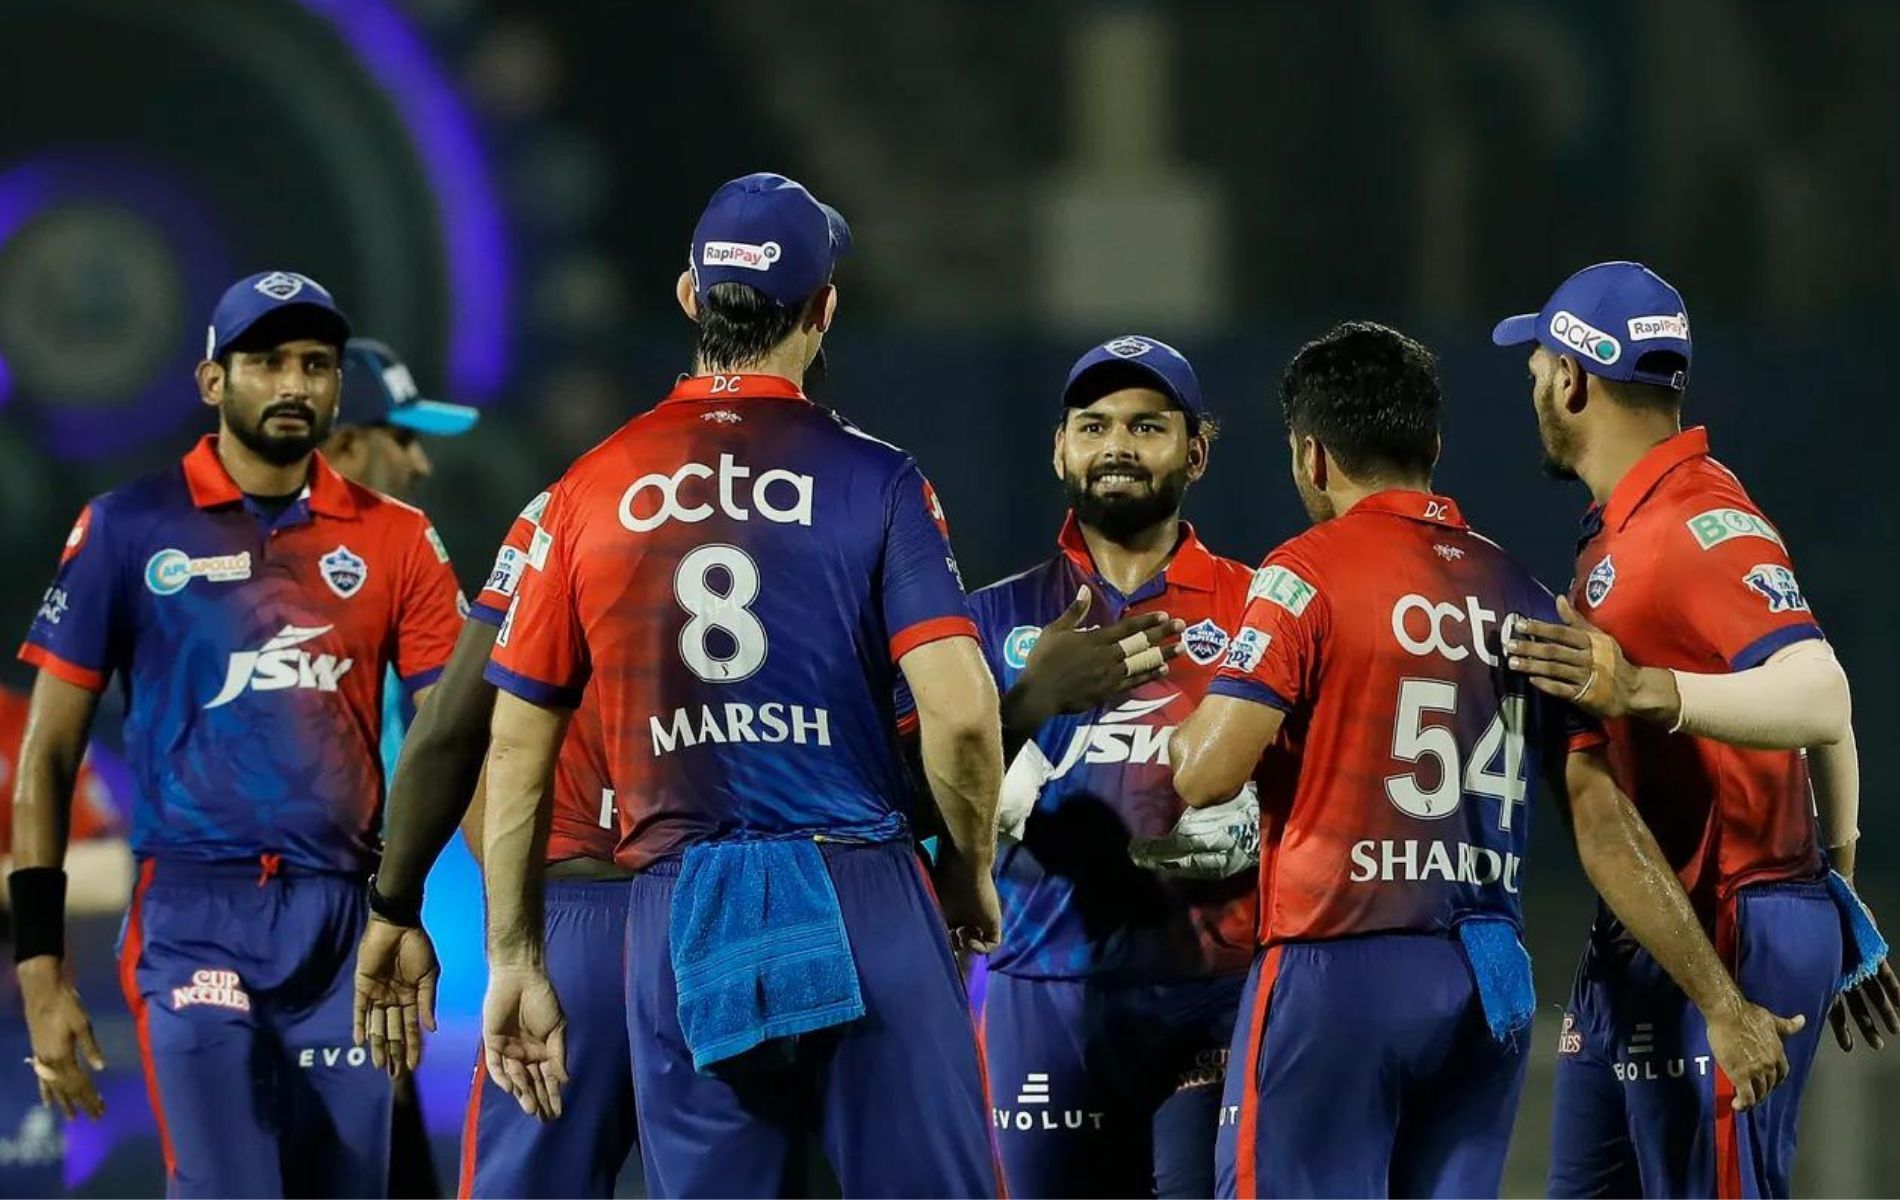 DC are slated to take on CSK on Sunday at the DY Patil Stadium